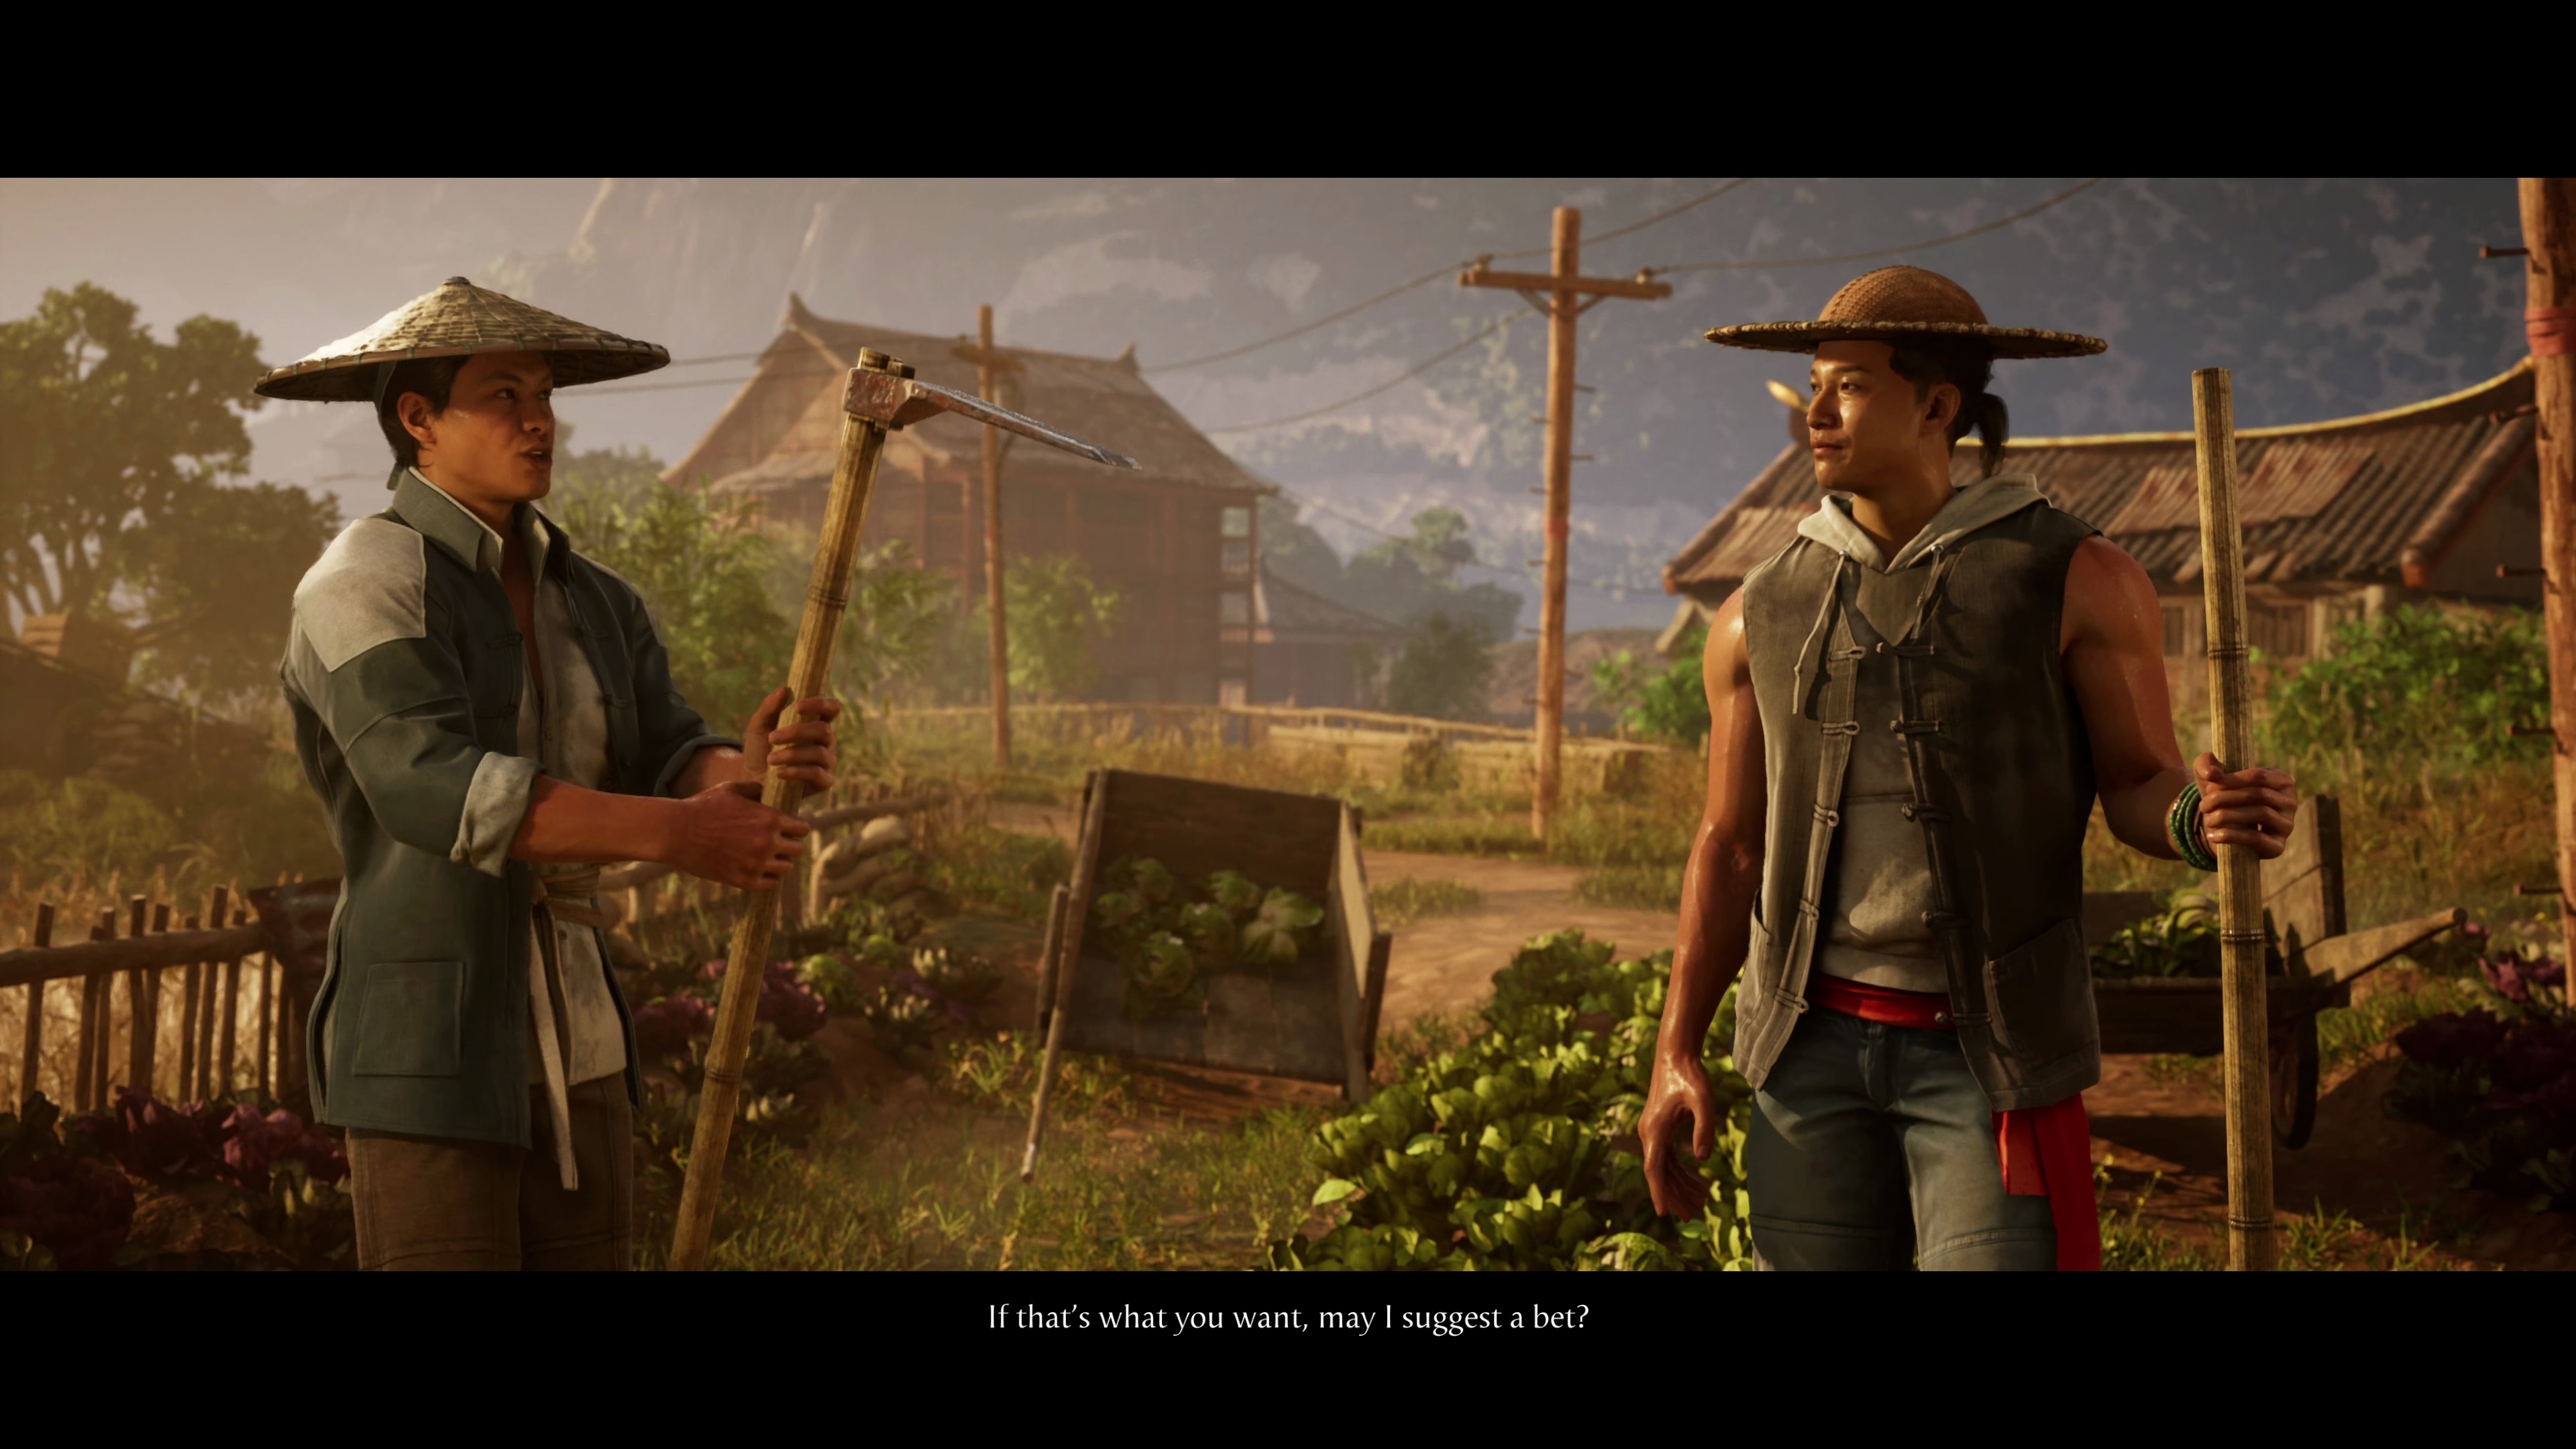 (The campaign retells the familiar Mortal Kombat story again Raiden and Kung Lao start here as simple farmers.)